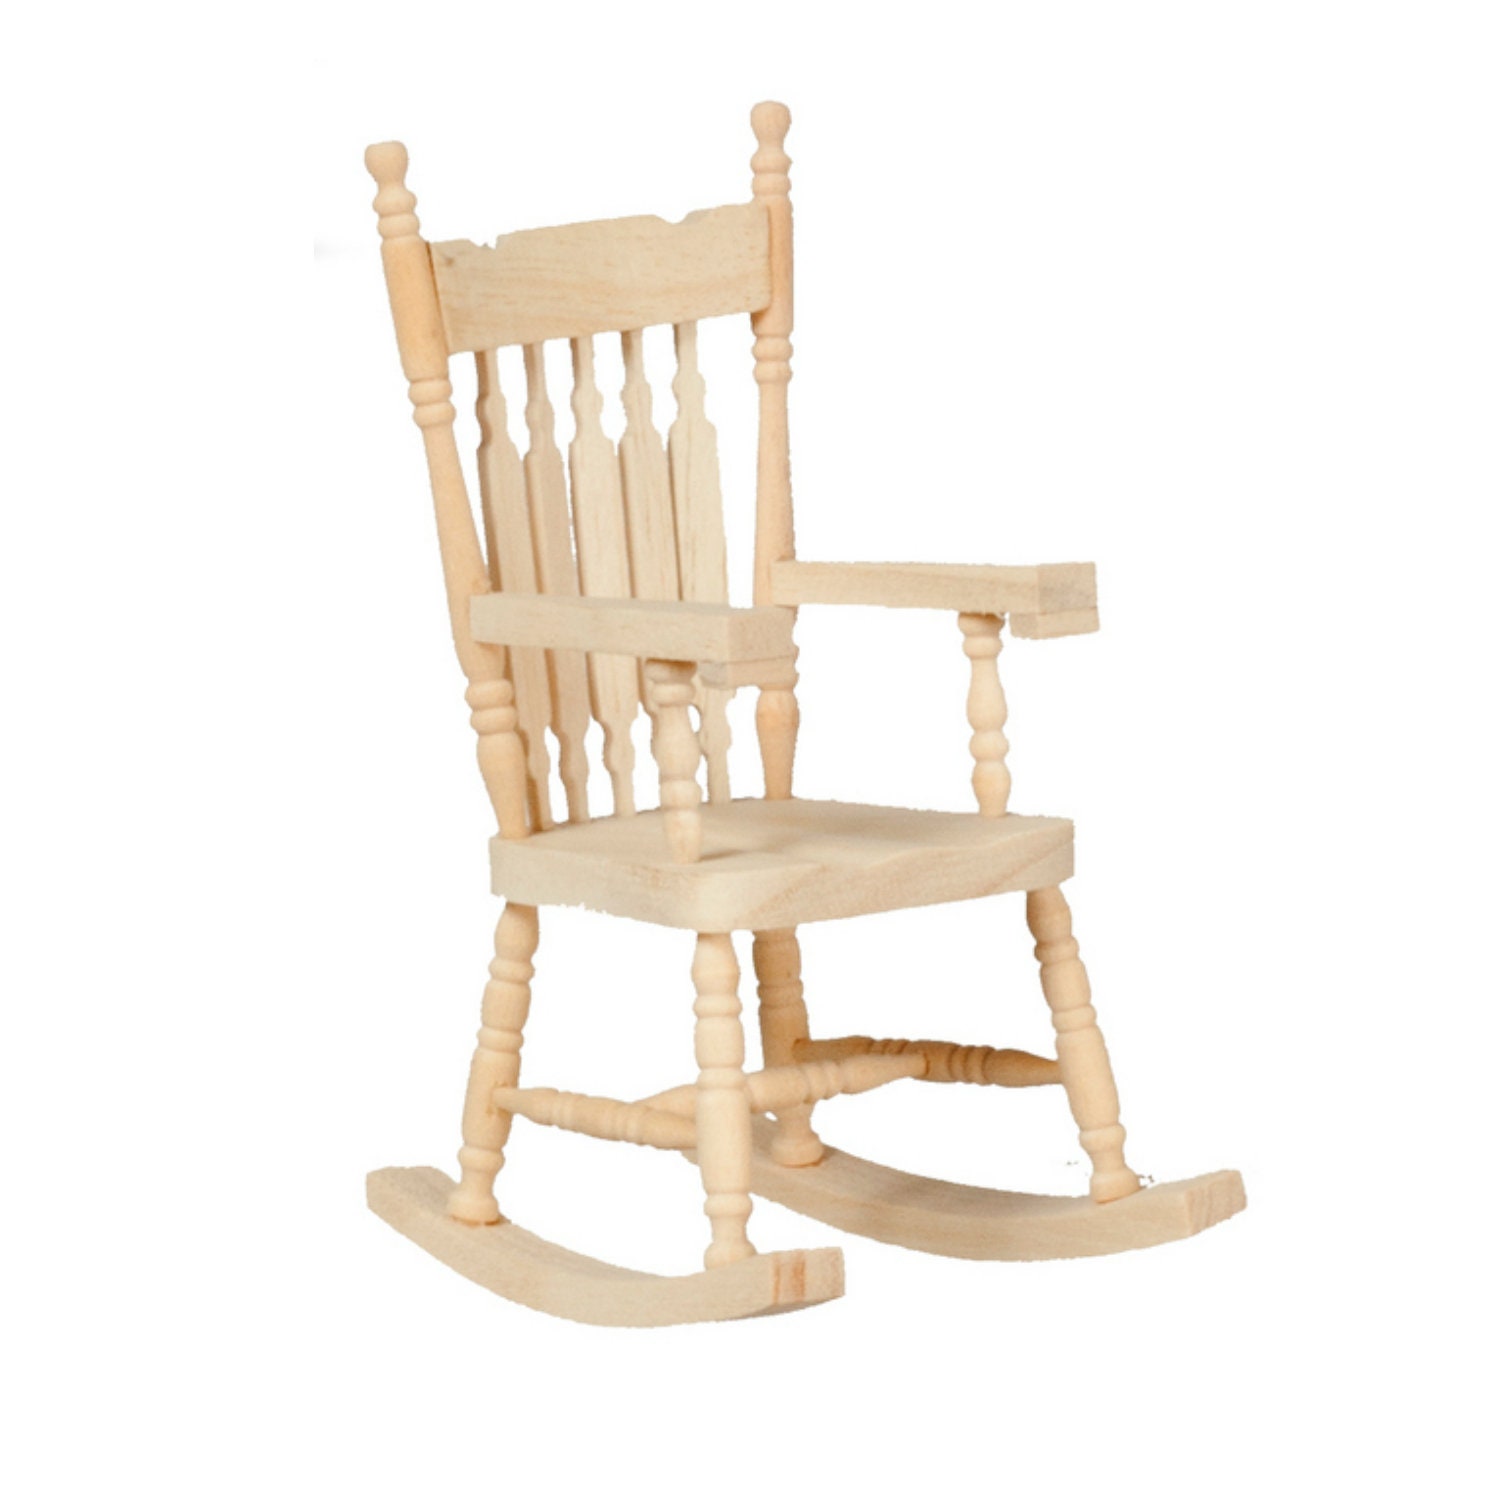 Rocking chair, unfinished